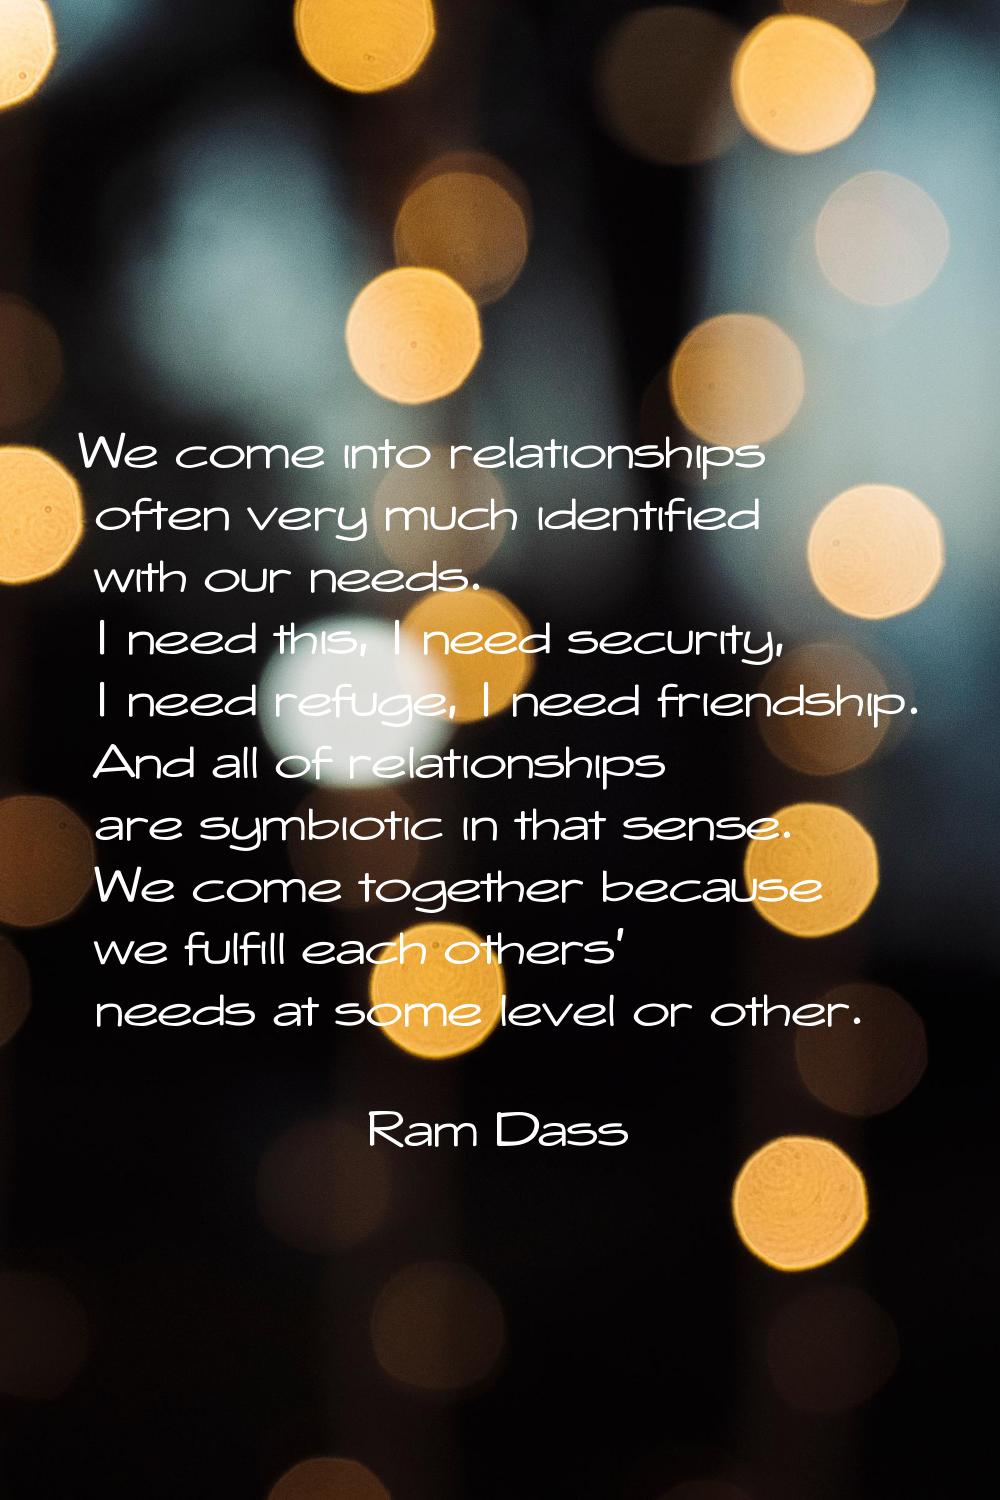 We come into relationships often very much identified with our needs. I need this, I need security,